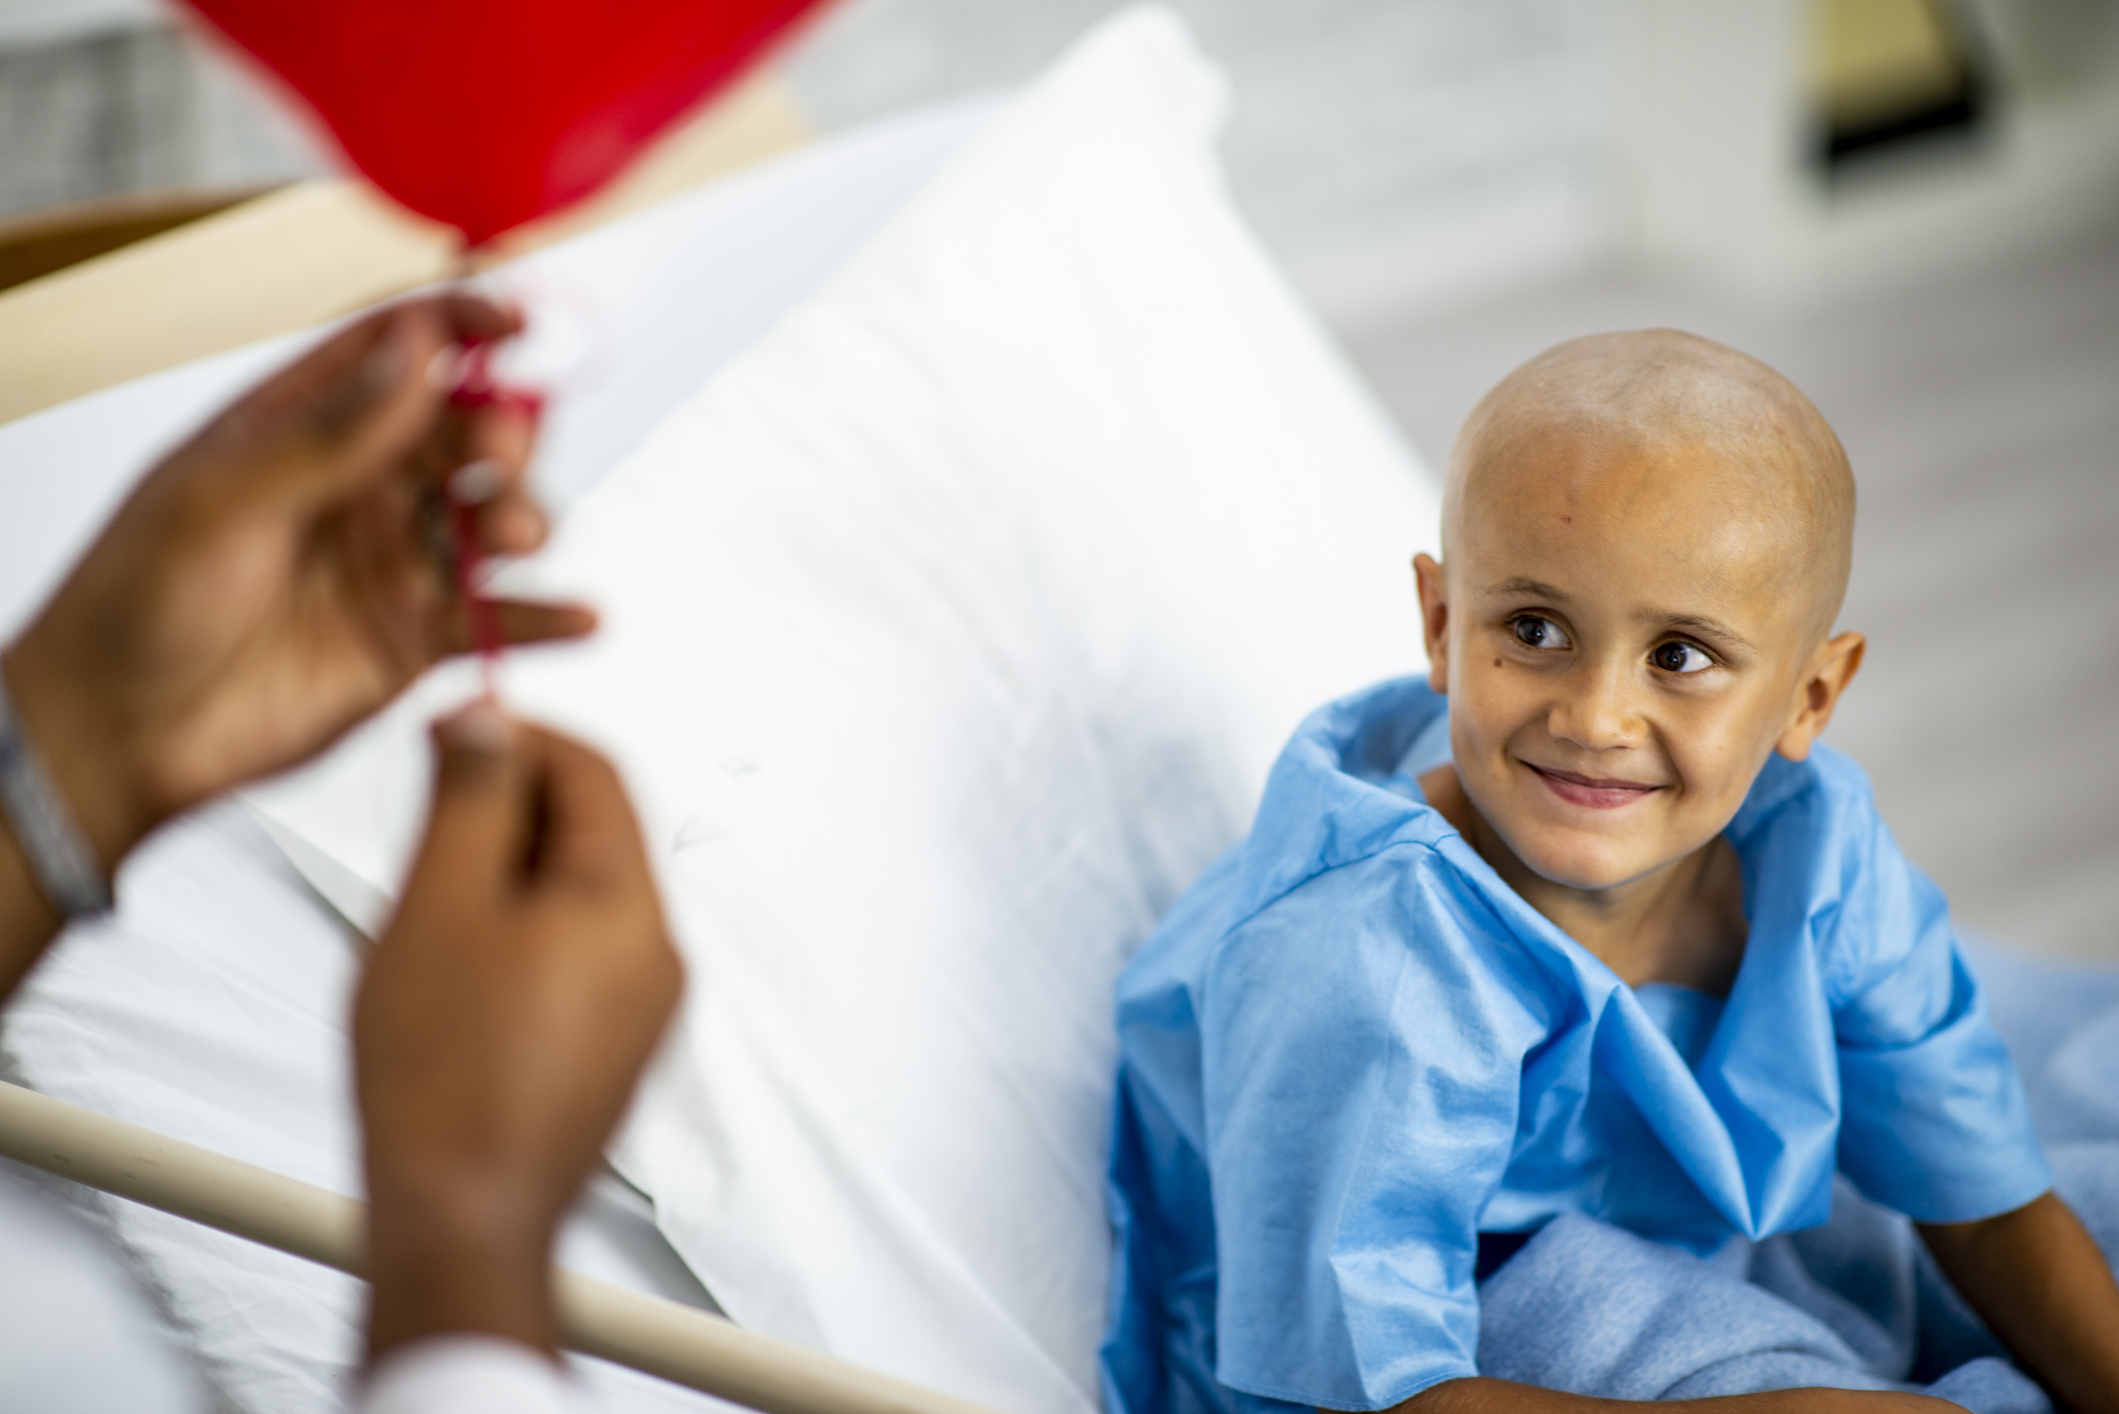 Young boy in hospital bed receiving a balloon